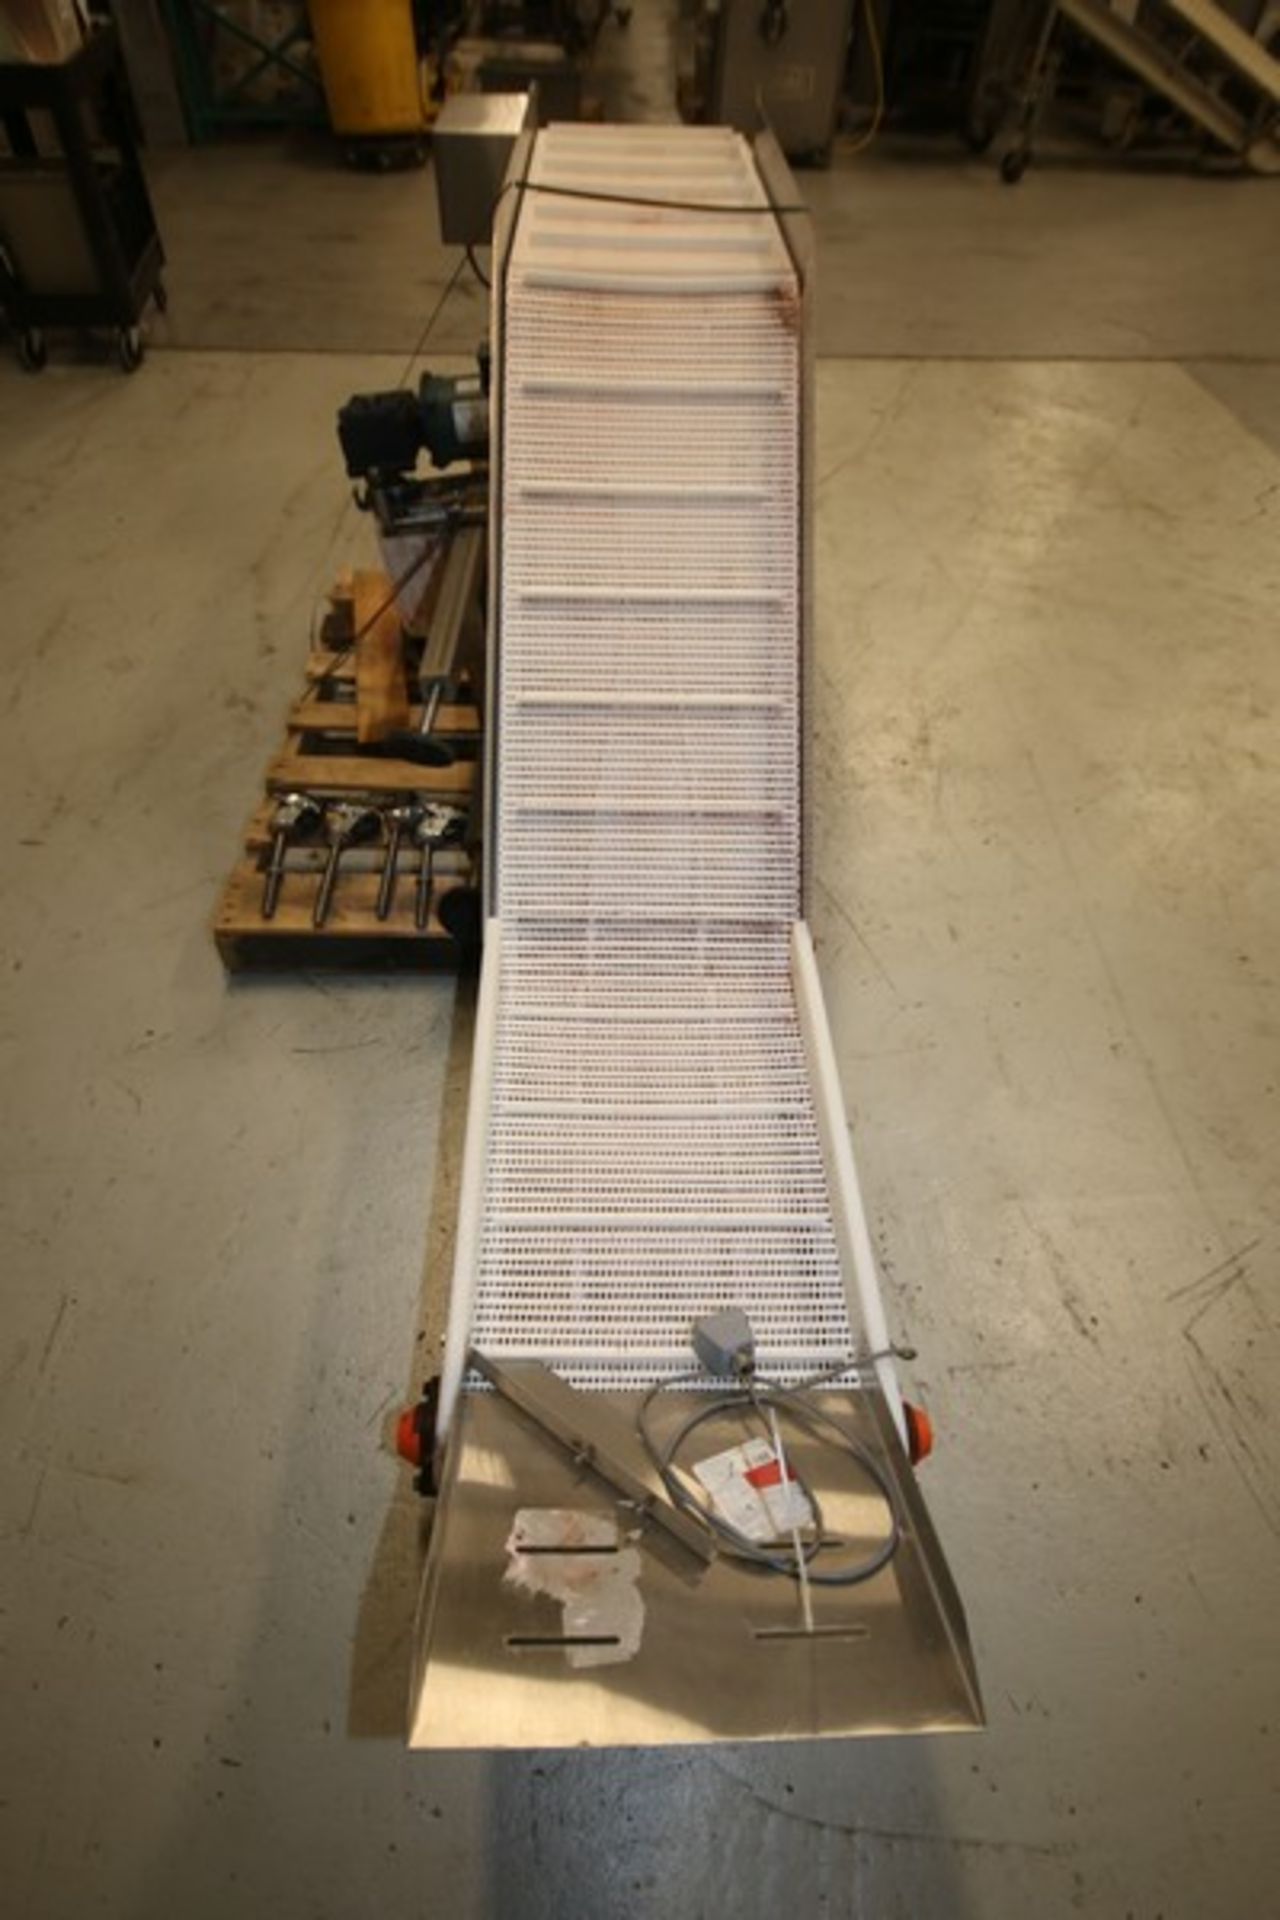 Universal Packaging Inc Aprox 9' L x 30" H x 18" W S/S Inclined Conveyor, Model TC.18.72 M, SN 1736, - Image 2 of 6